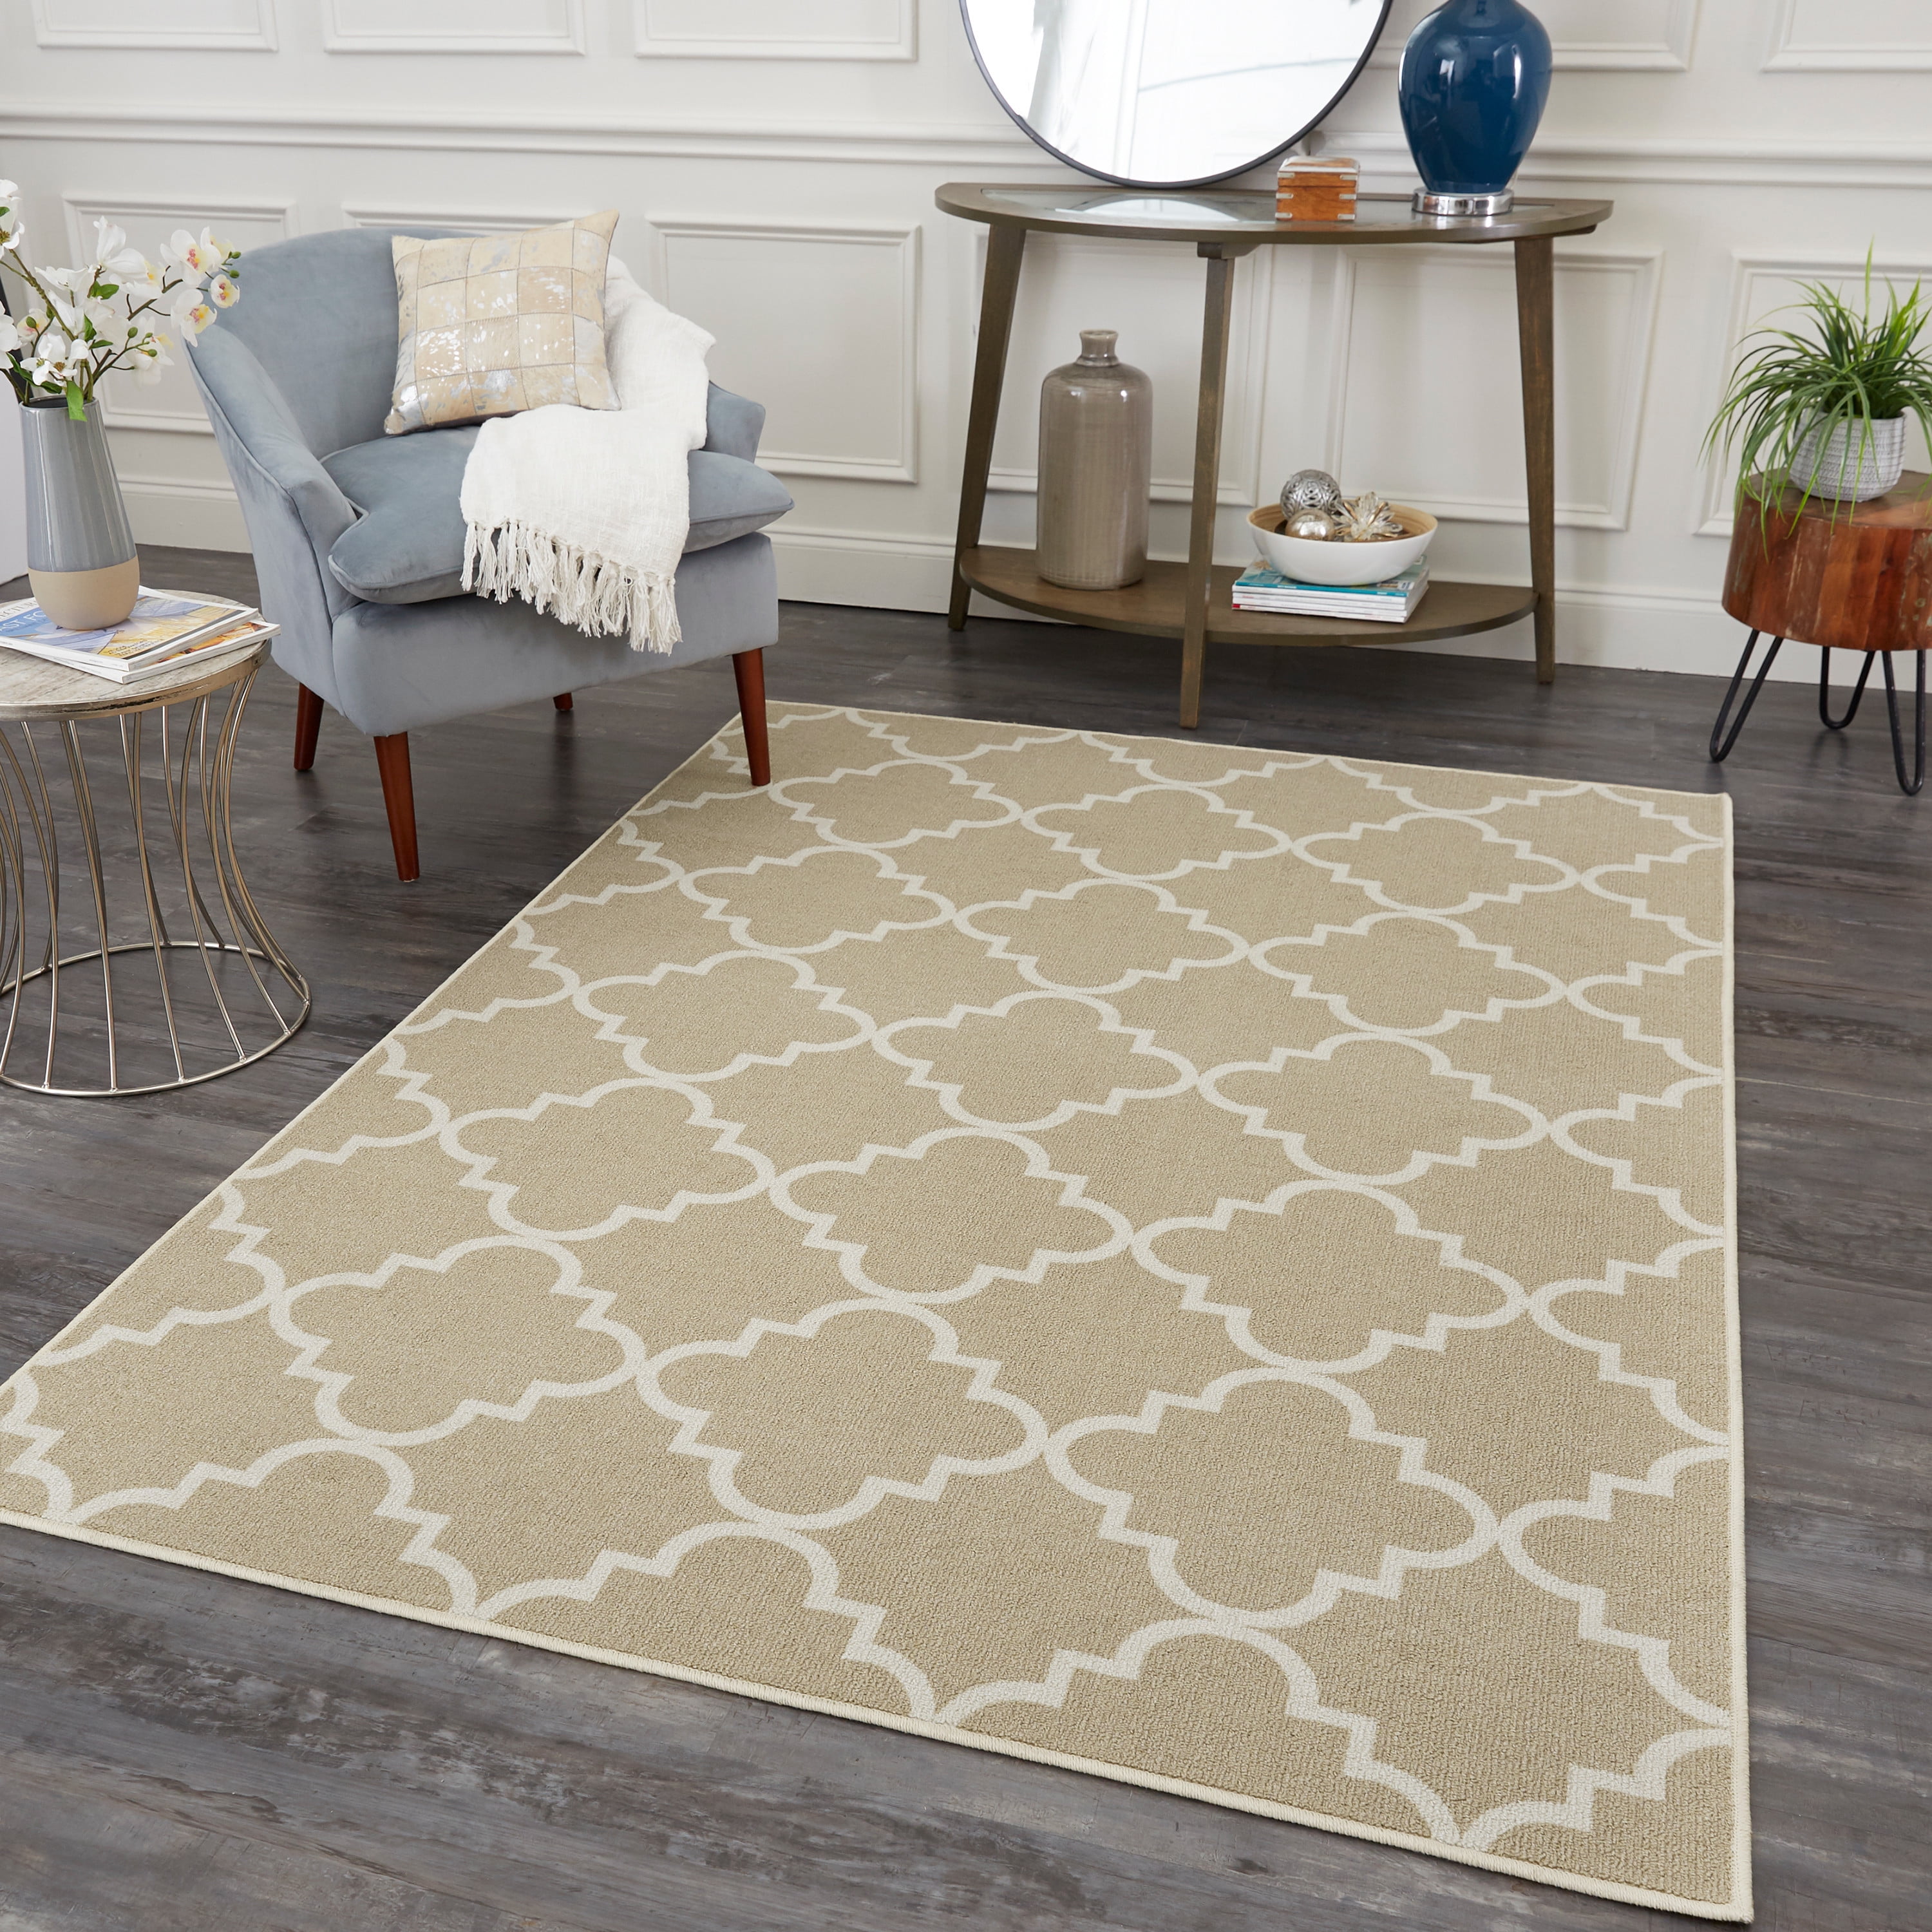 SIXHOME 3'x5' Area Rugs Washable Rugs for Living Room Boho Area Rug Modern  Geometric Neutral Carpets and Area Rugs for Home Decor Foldable Non Slip